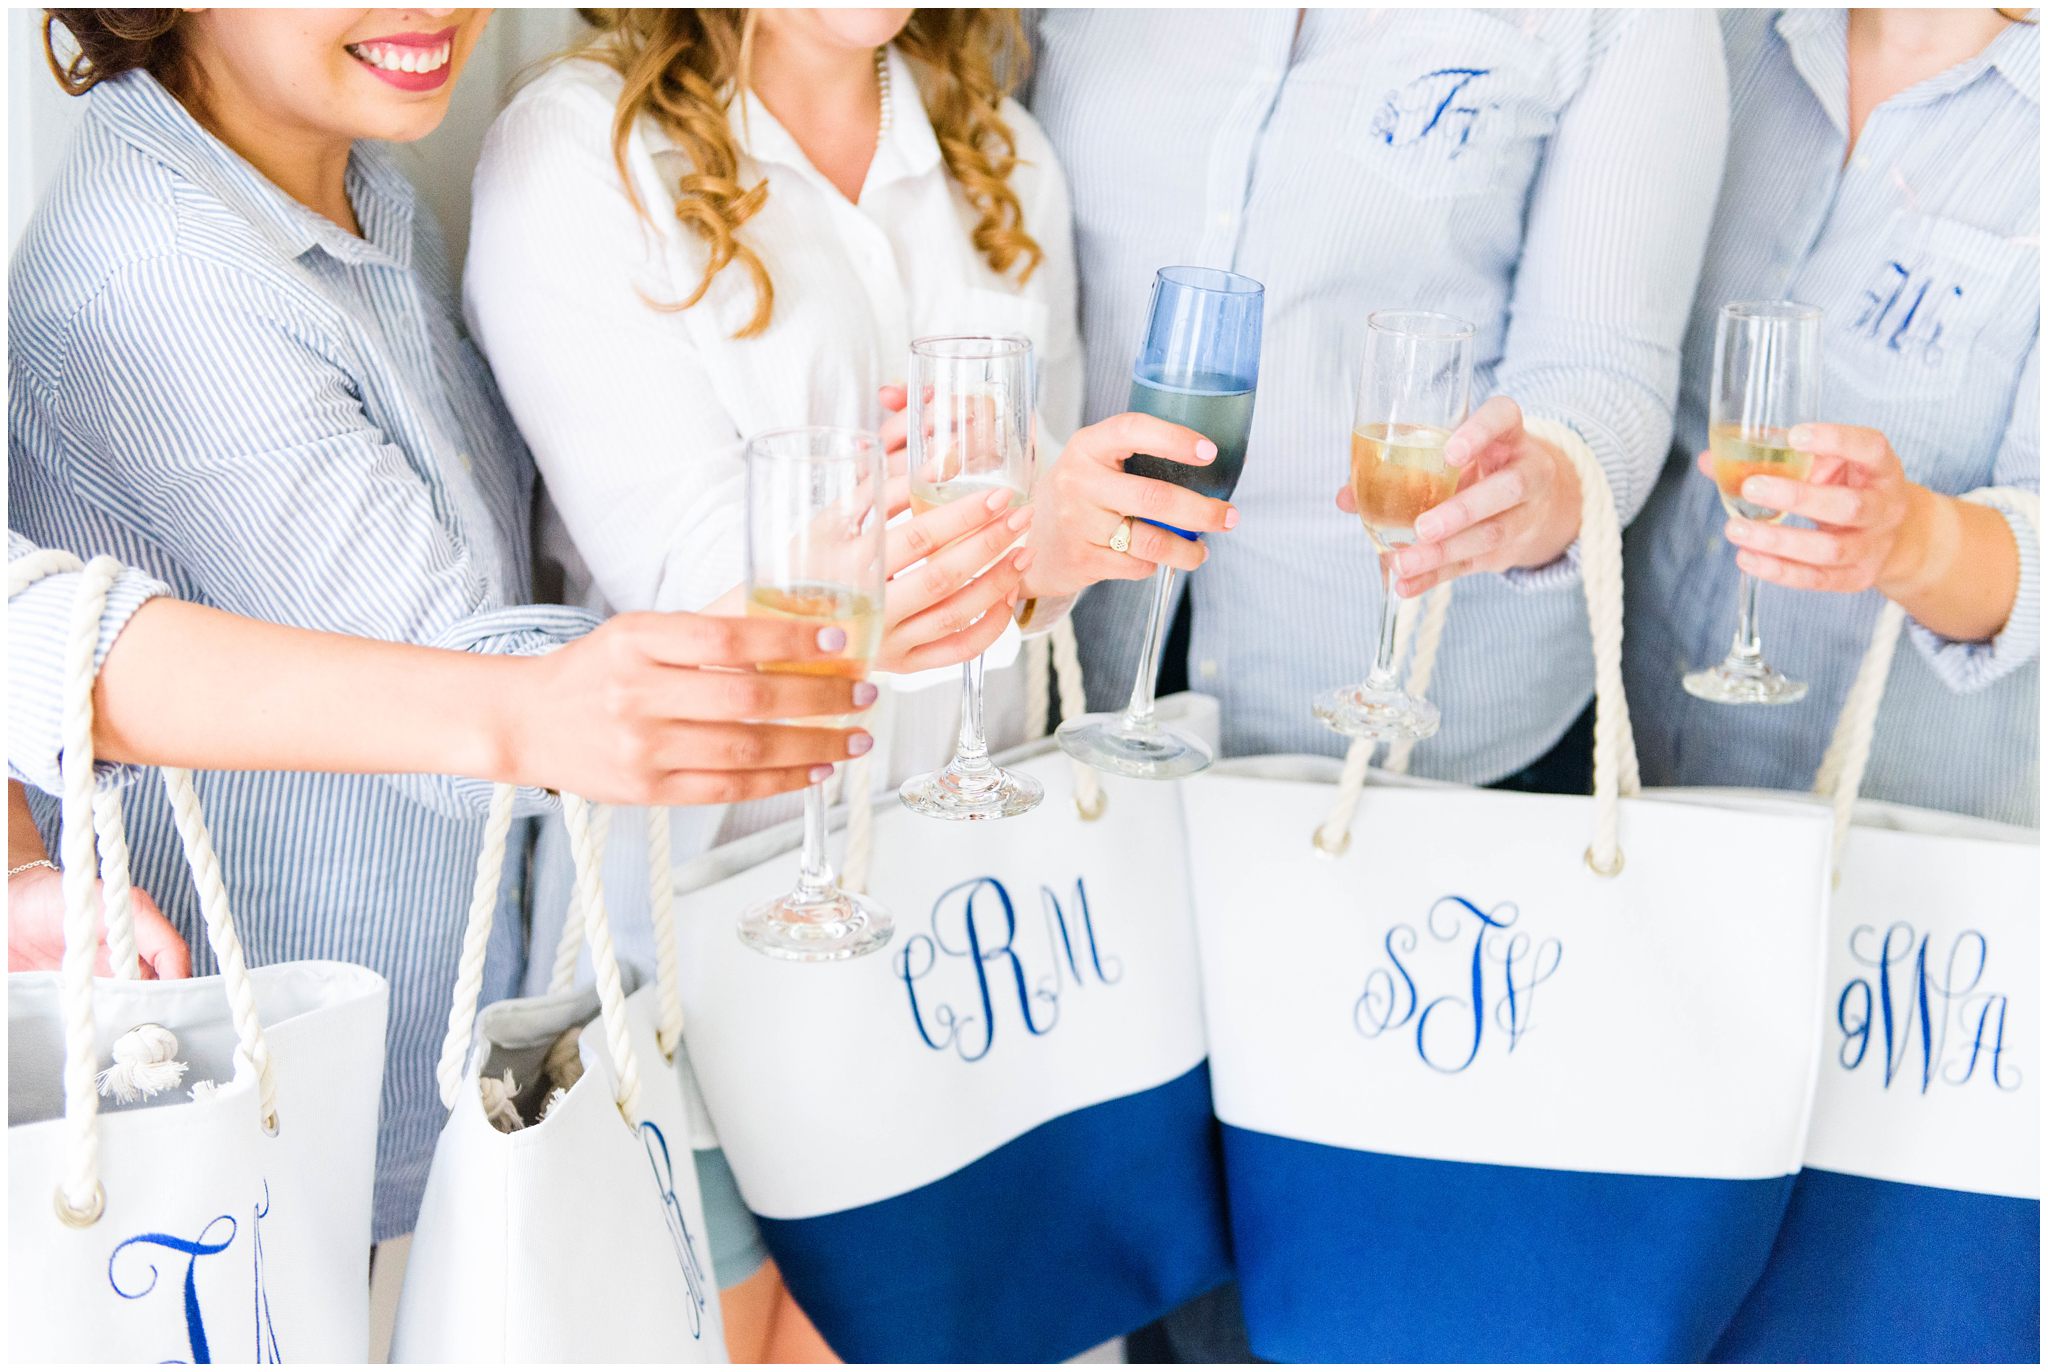 creative bridesmaids gift | navy and white nautical inspired monogrammed tote bags